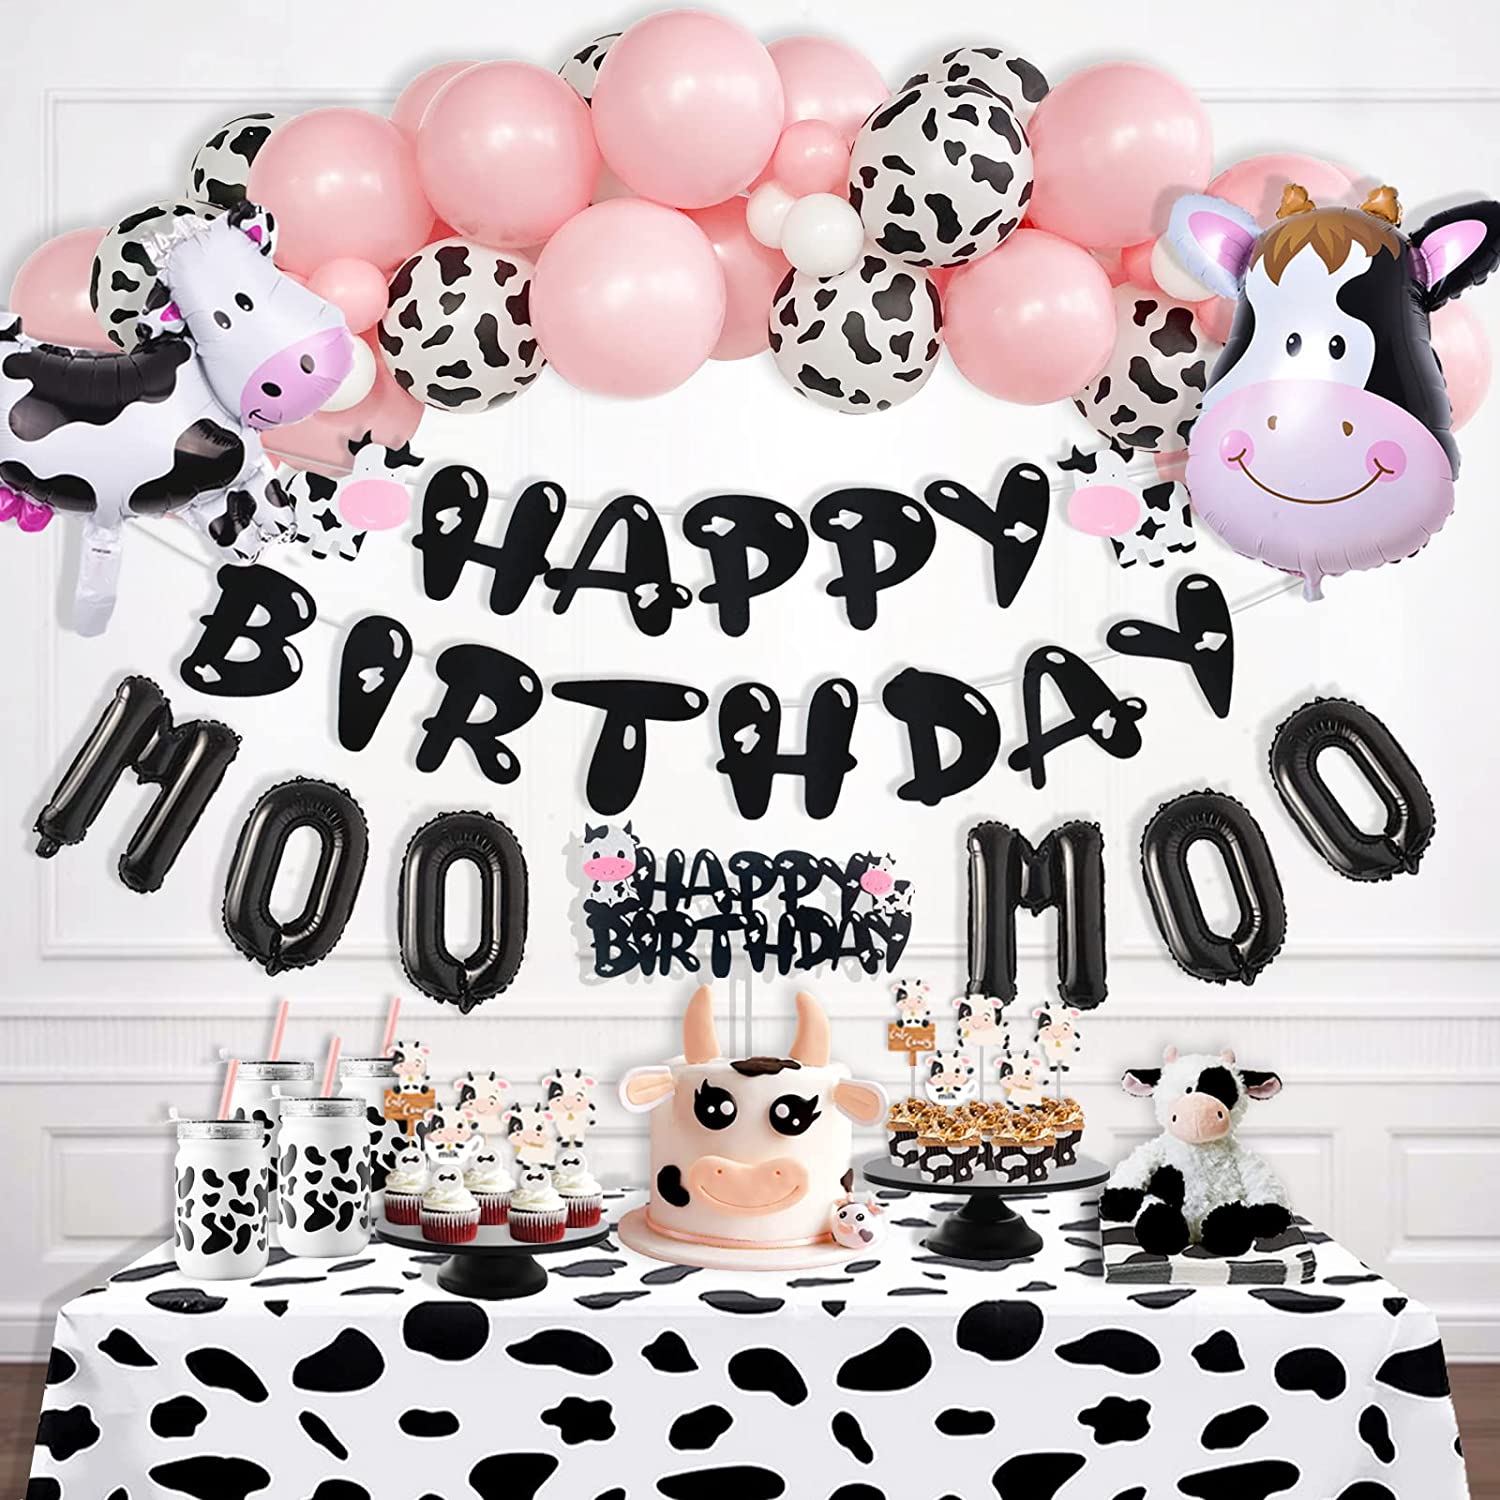 cow-themed party